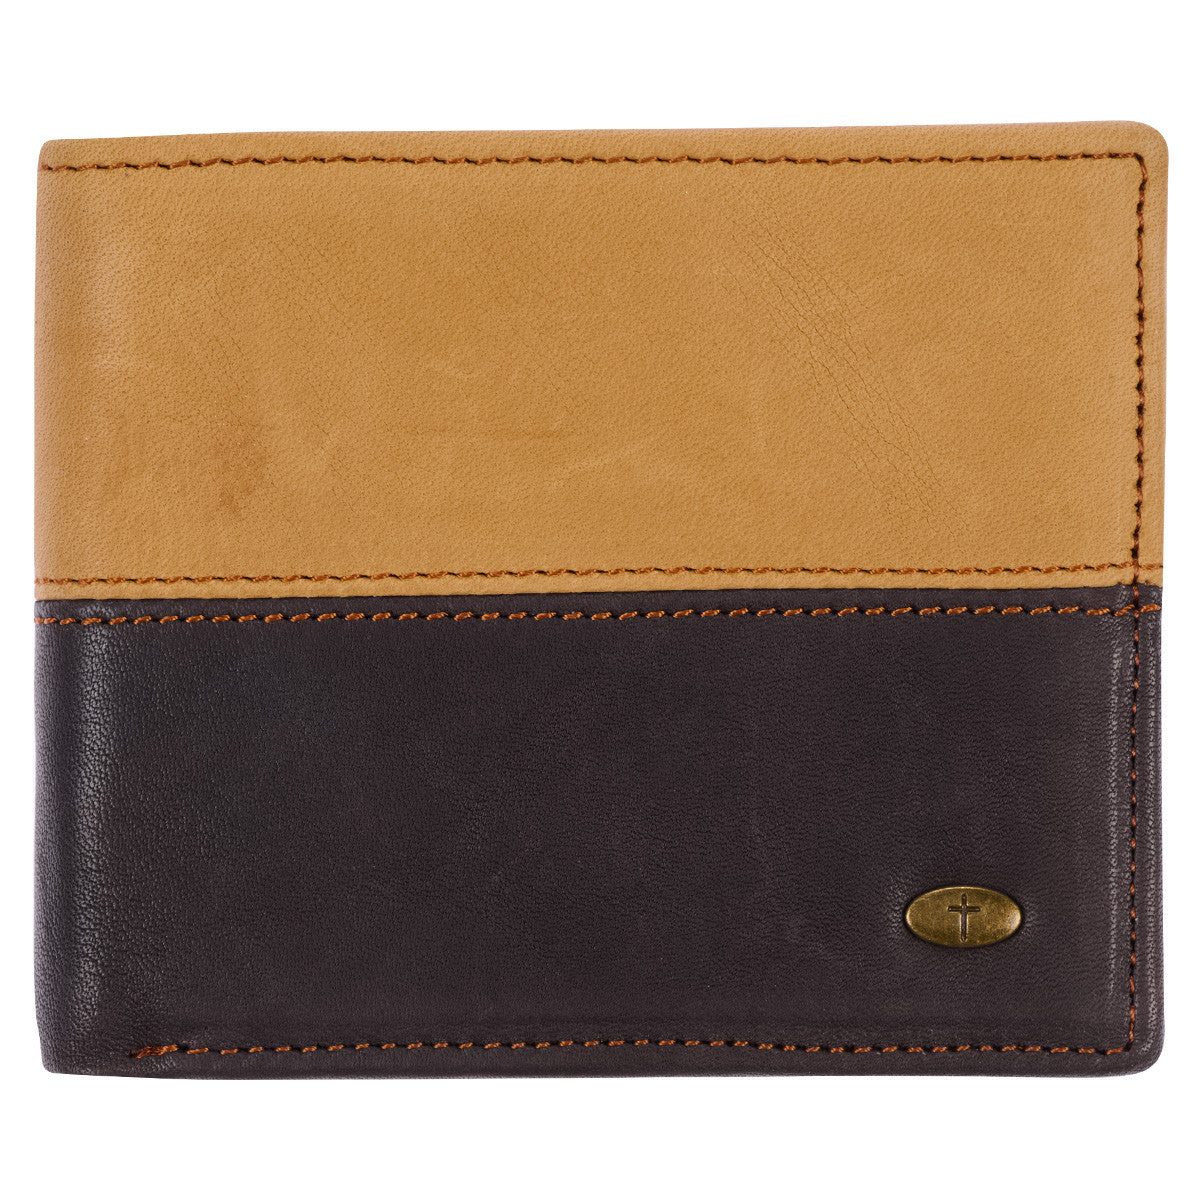 LEATHER WALLET CROSS TWO TONE BROWN & CAMEL